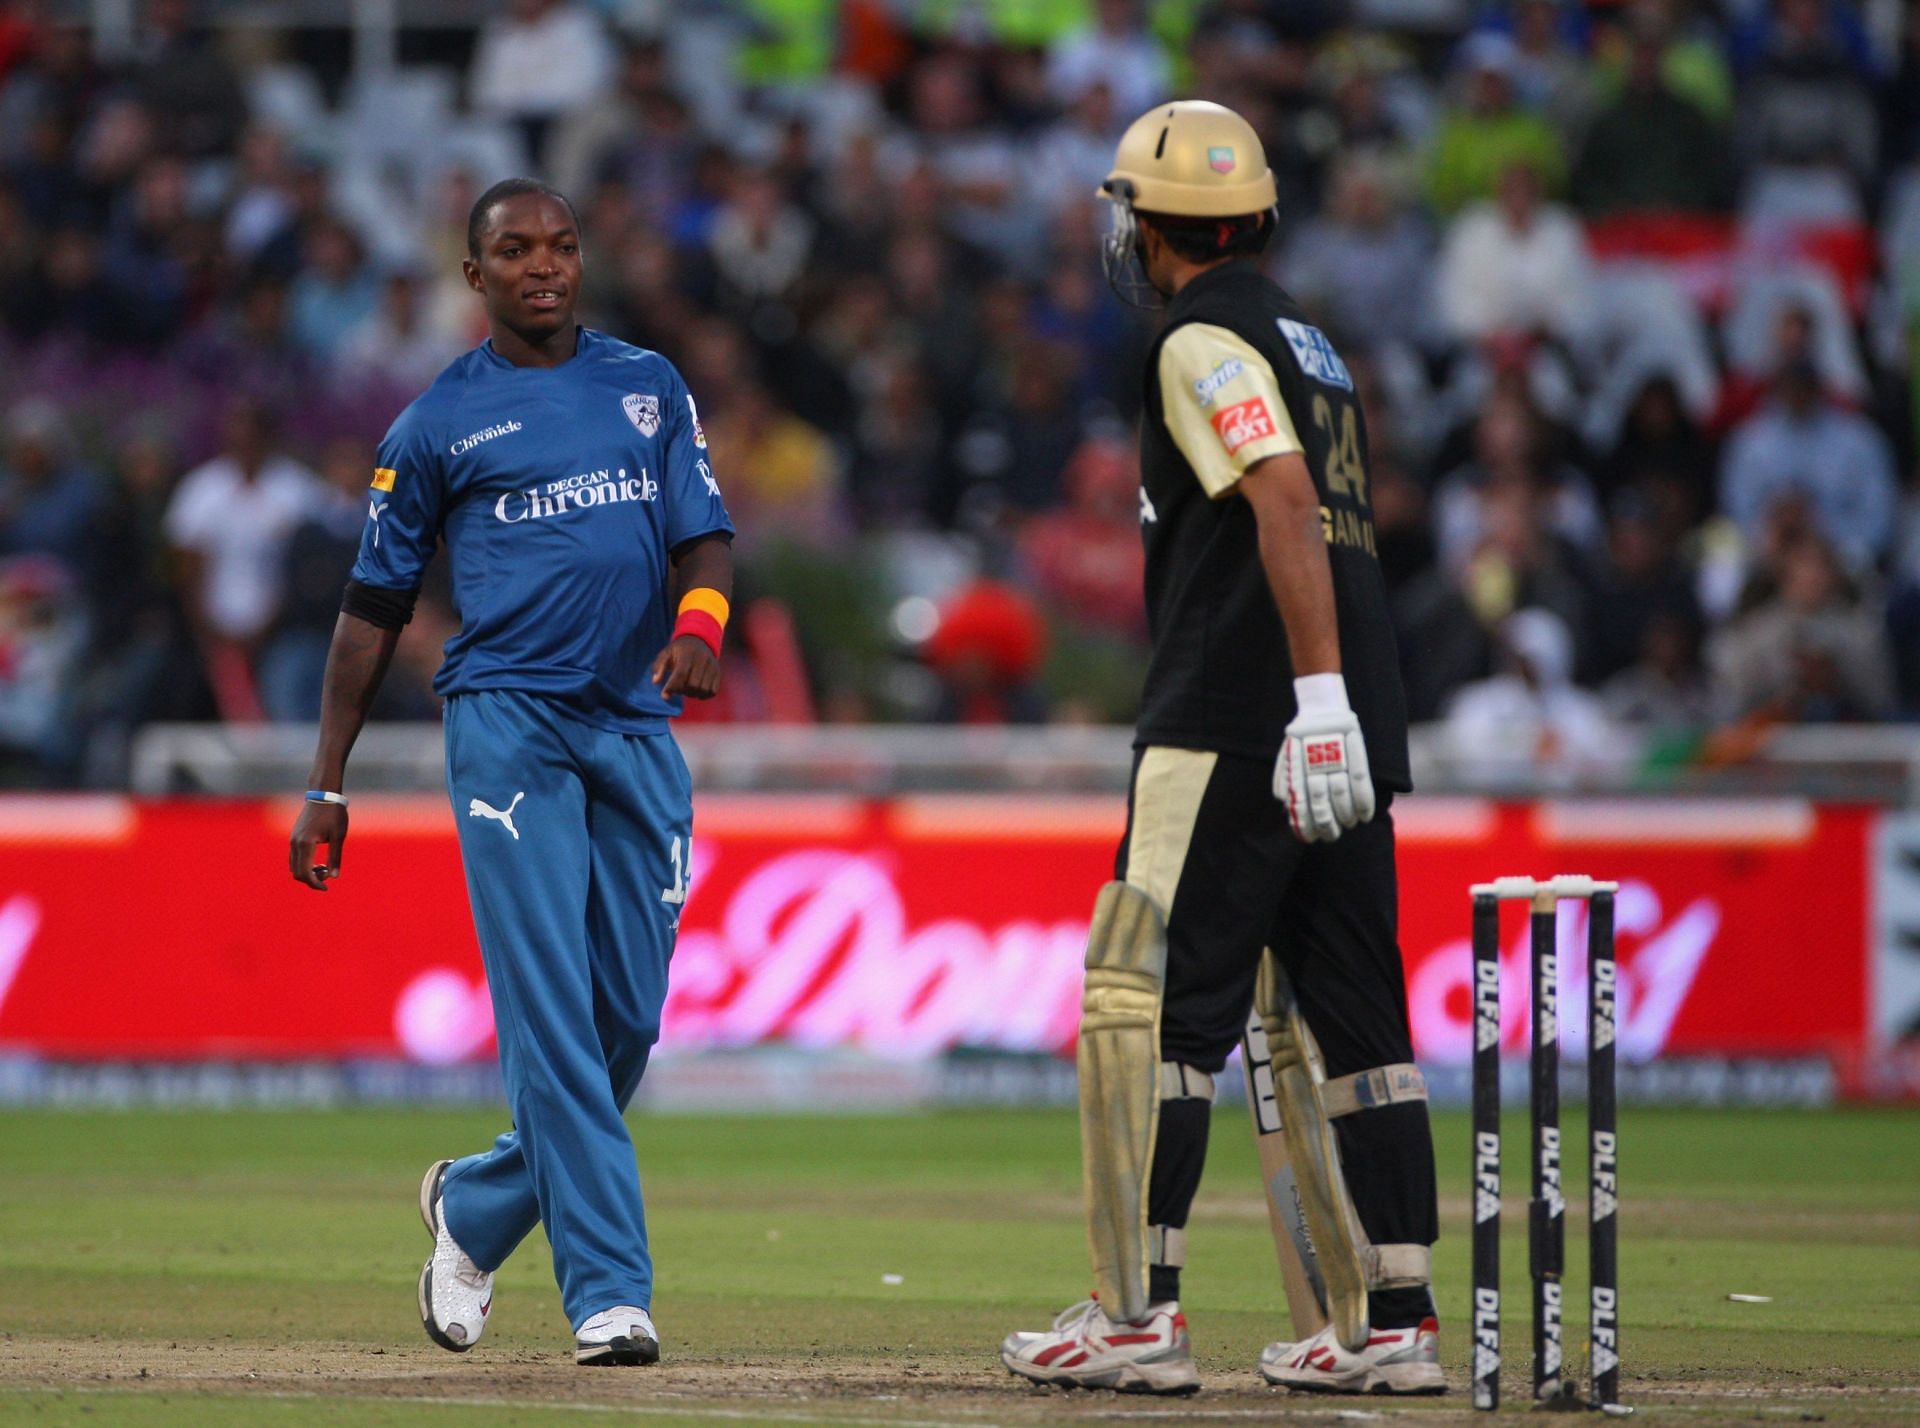 Fidel Edwards won IPL 2009 with the Deccan Chargers